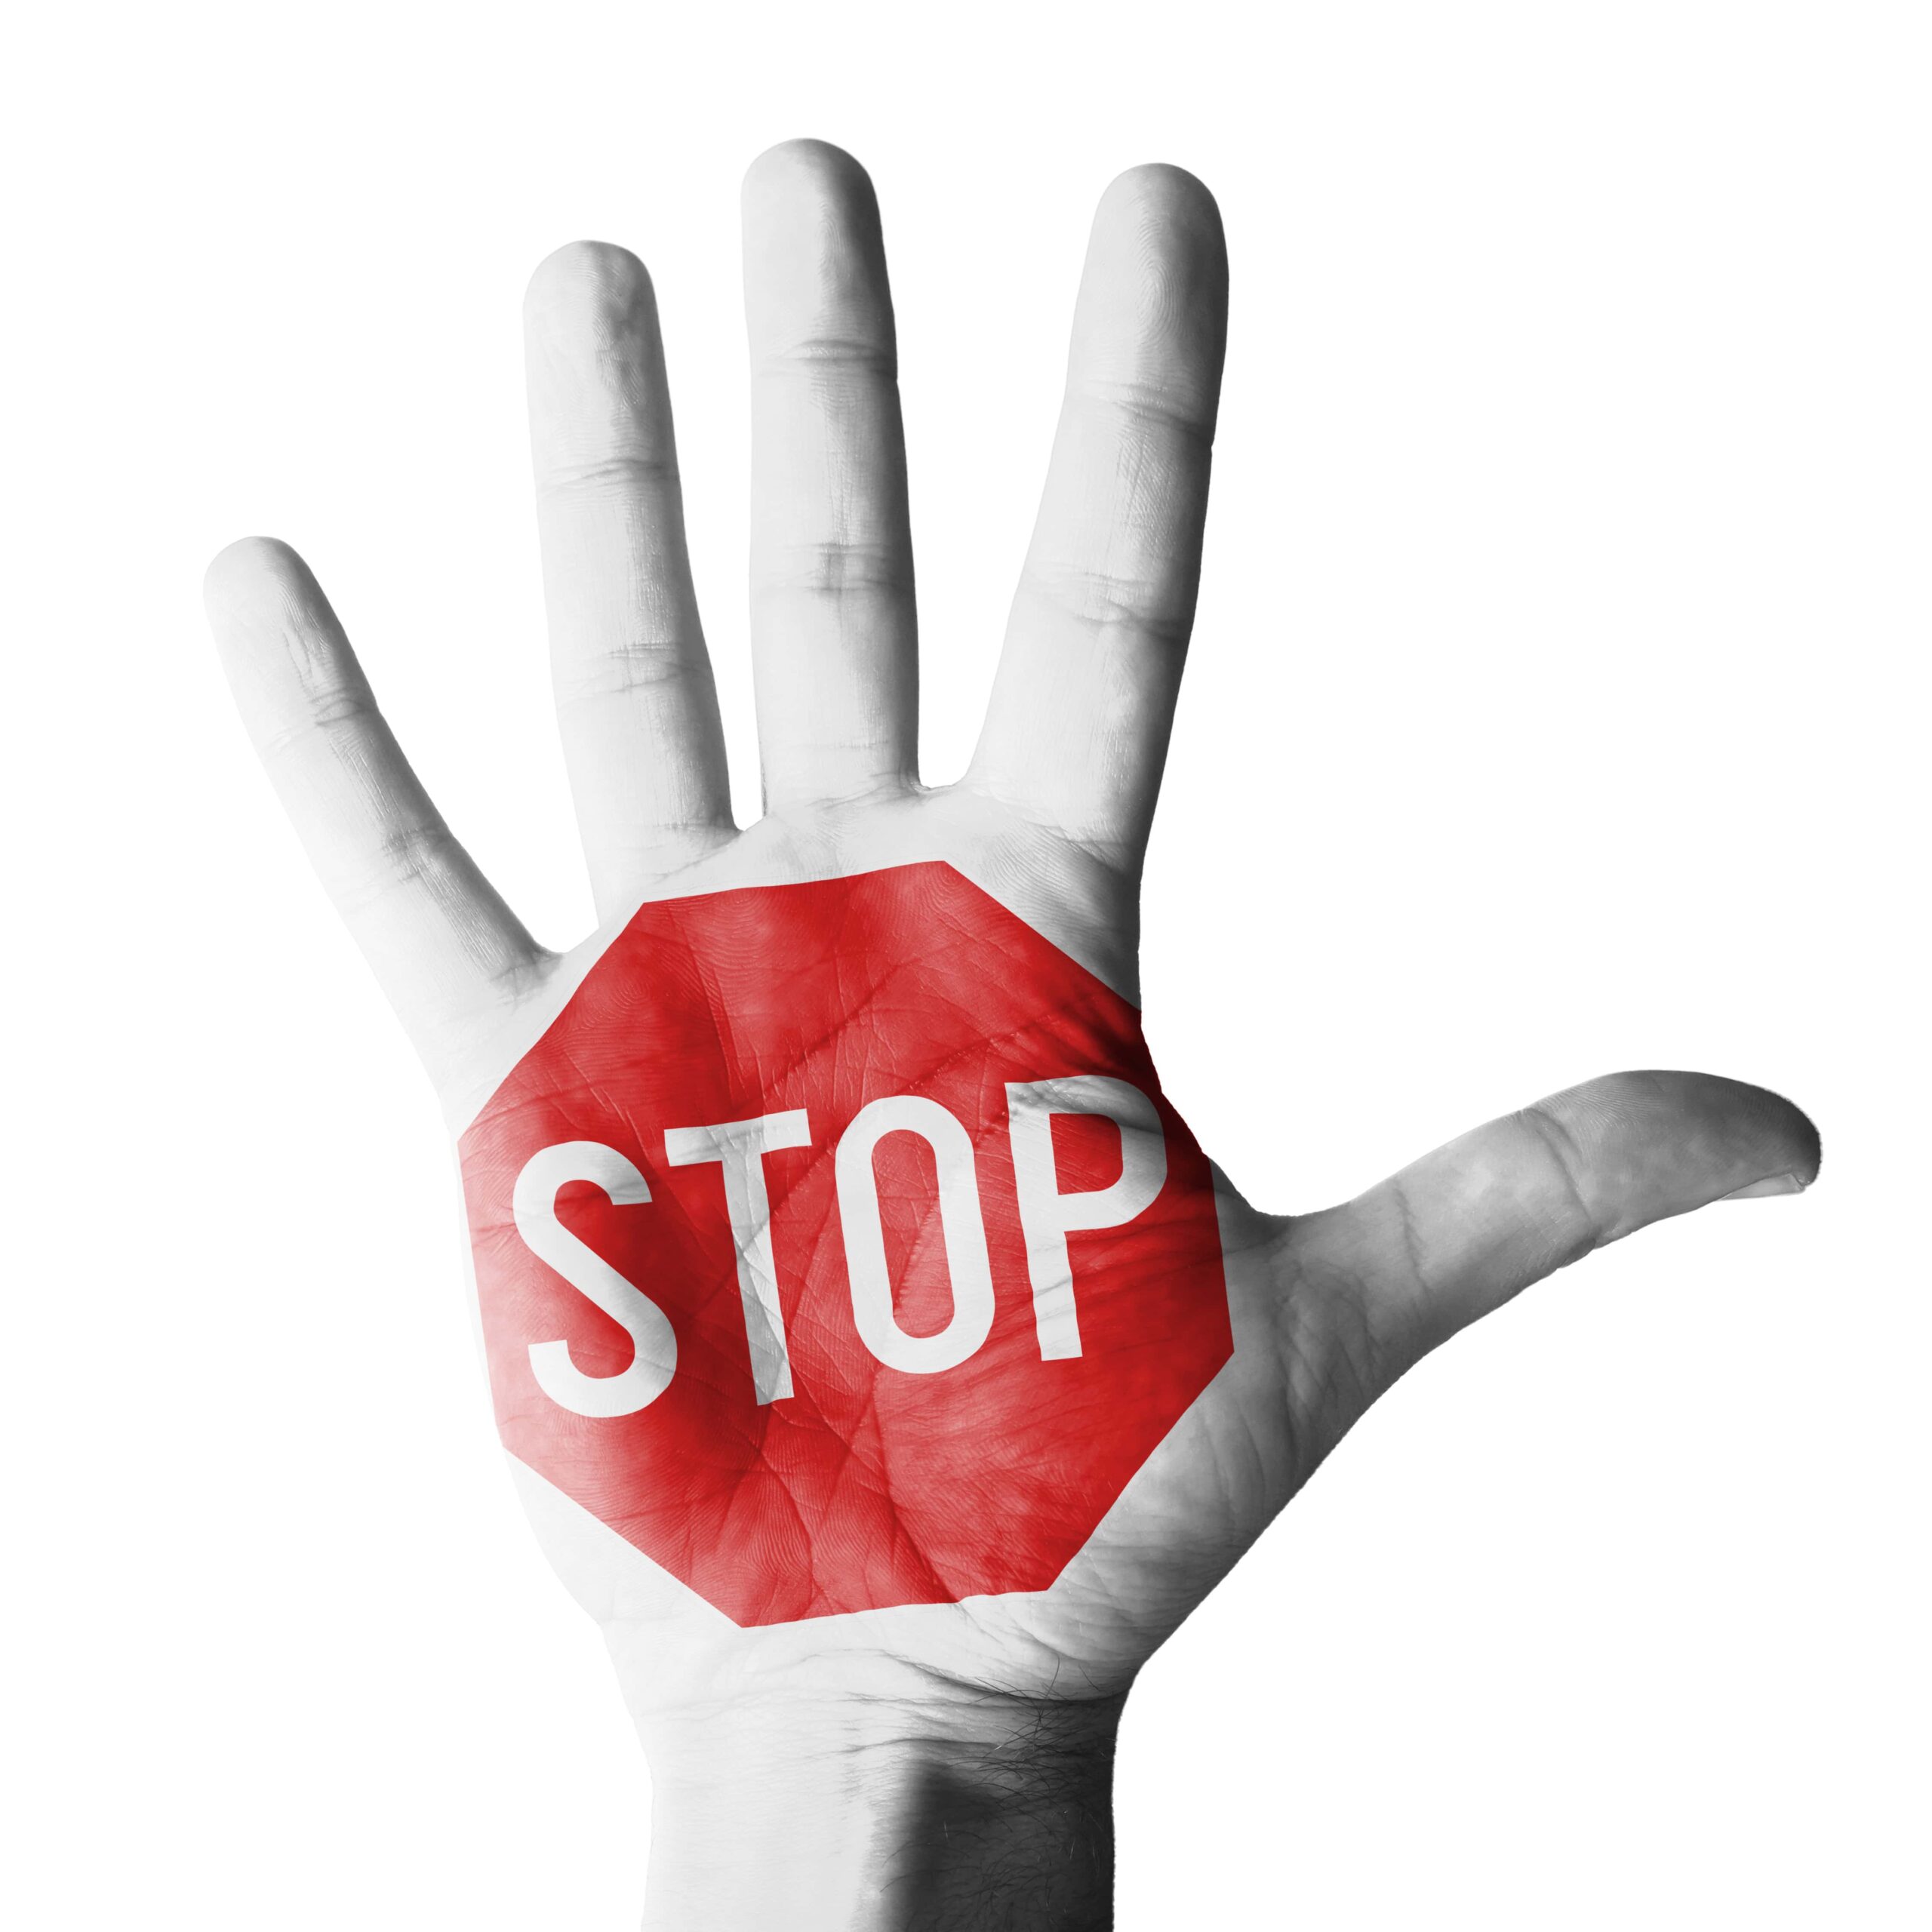 Image depicting a stop sign for sexual harassment in the workplace